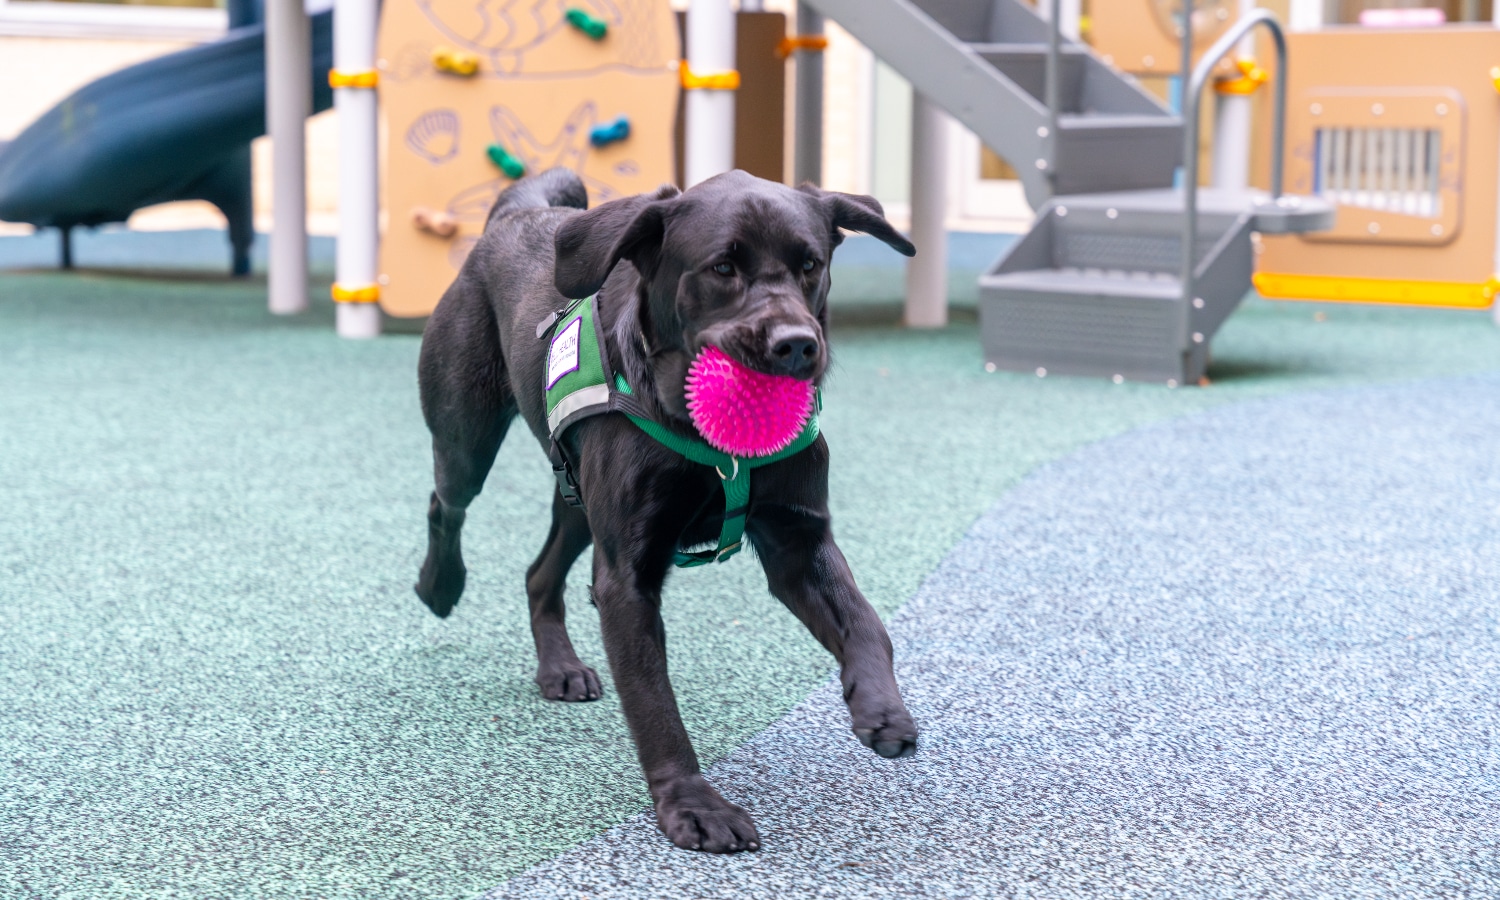 Maynard Canine Crew's dog, Sam, runs with a ball in her mouth on the playground at Maynard Children's Hospital.